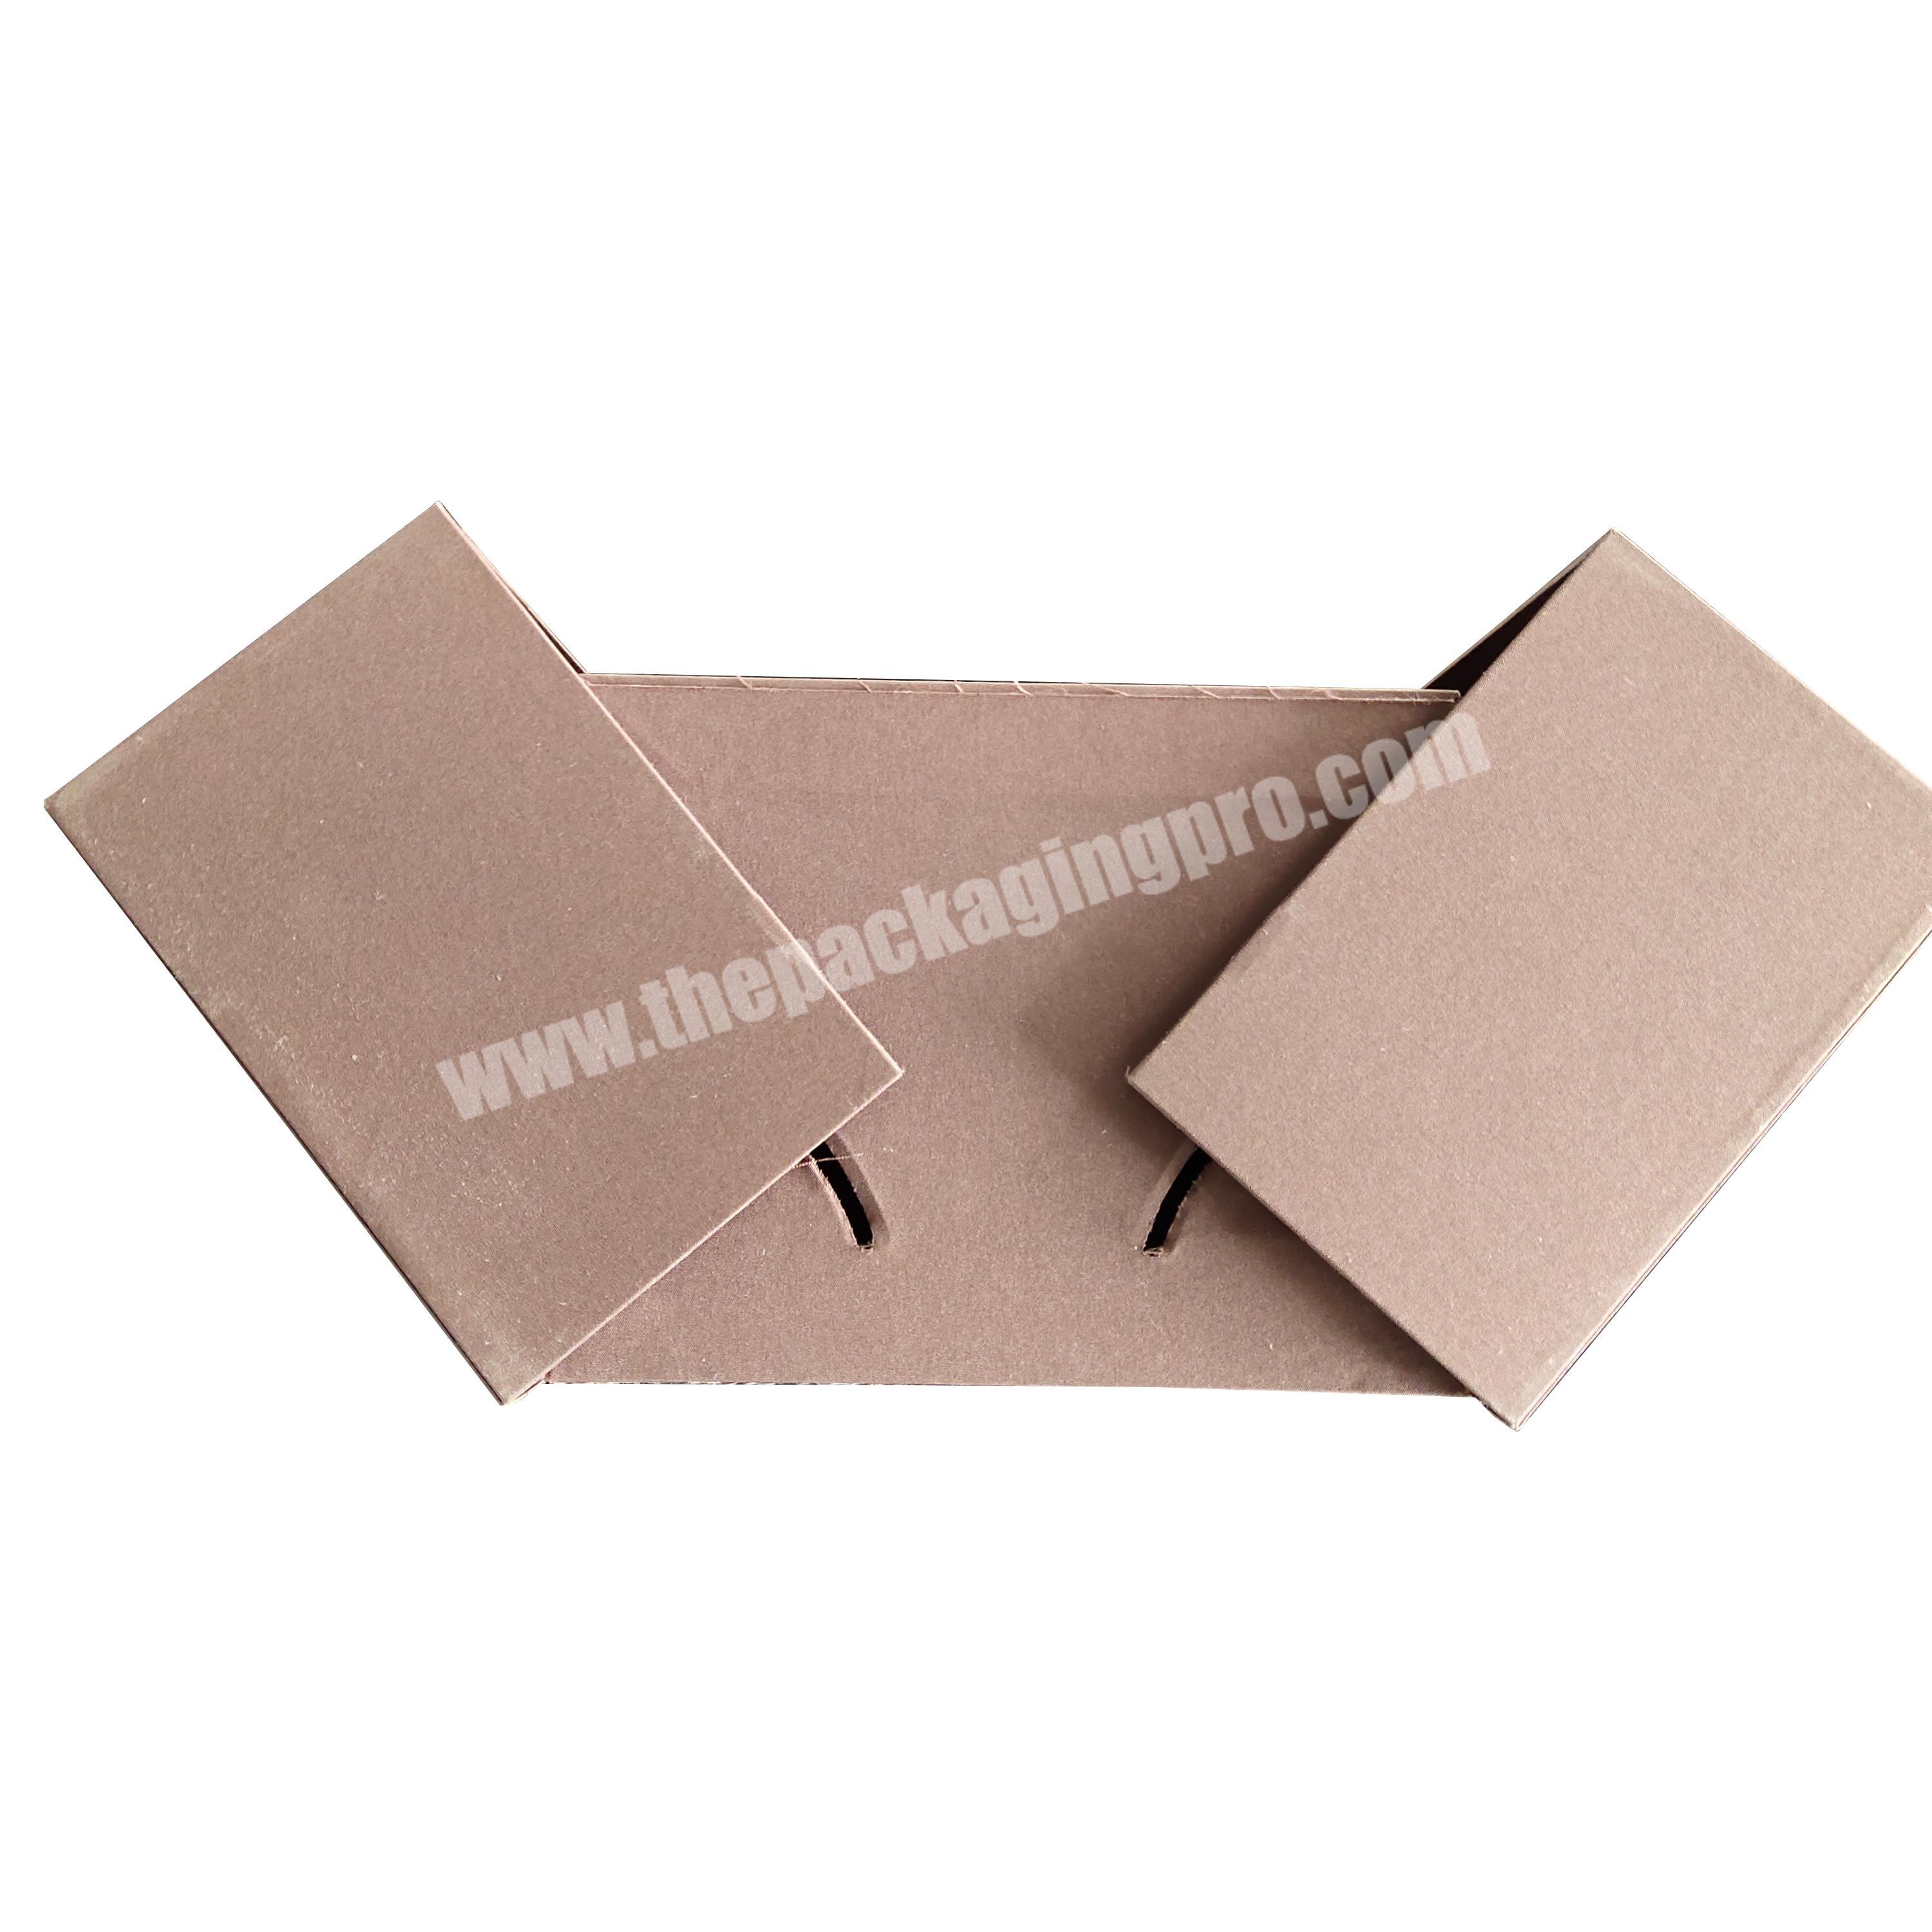 custom china luxury brown boxes cloth and cardboard double door for martell wine bottle packaging